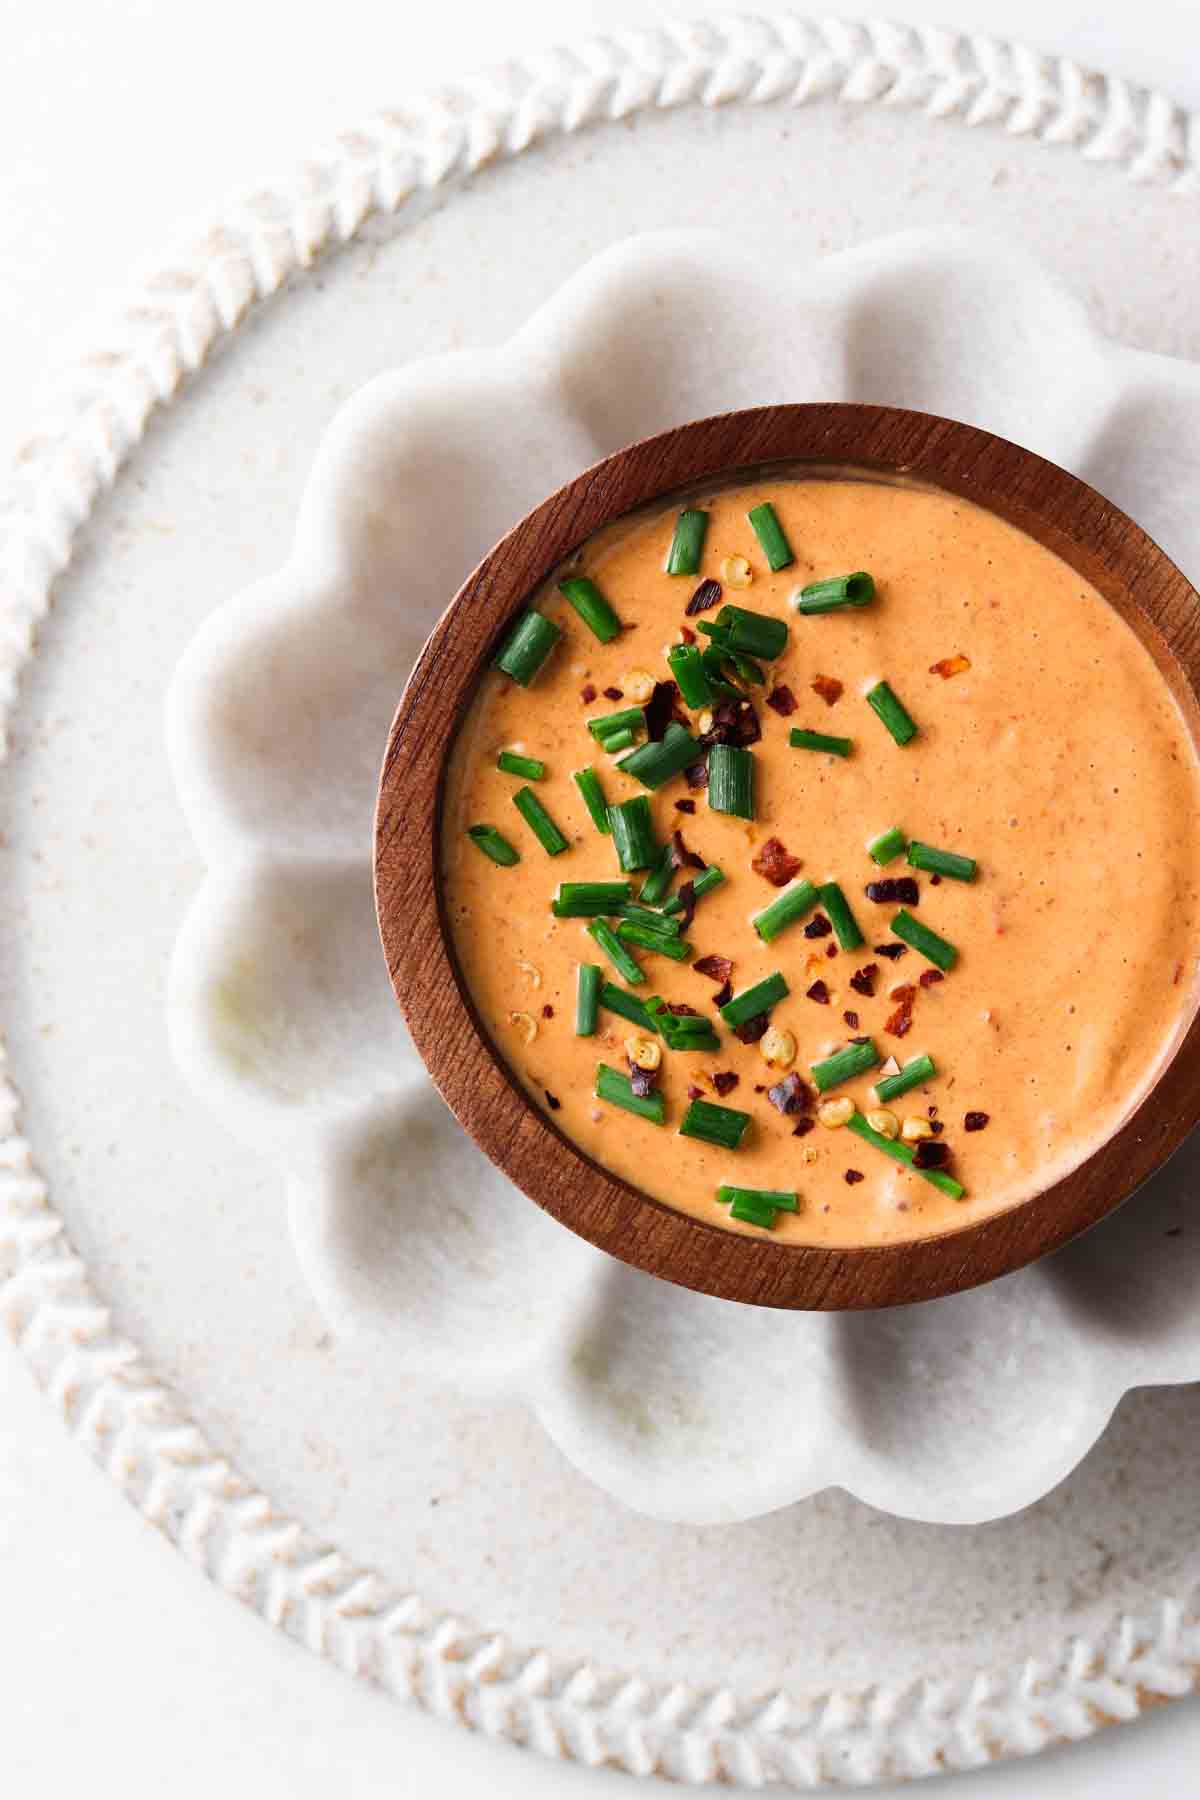 Orange breakfast burrito sauce in a small wooden bowl with sitting in a flower white bowl with fresh chives and red pepper flakes on top.